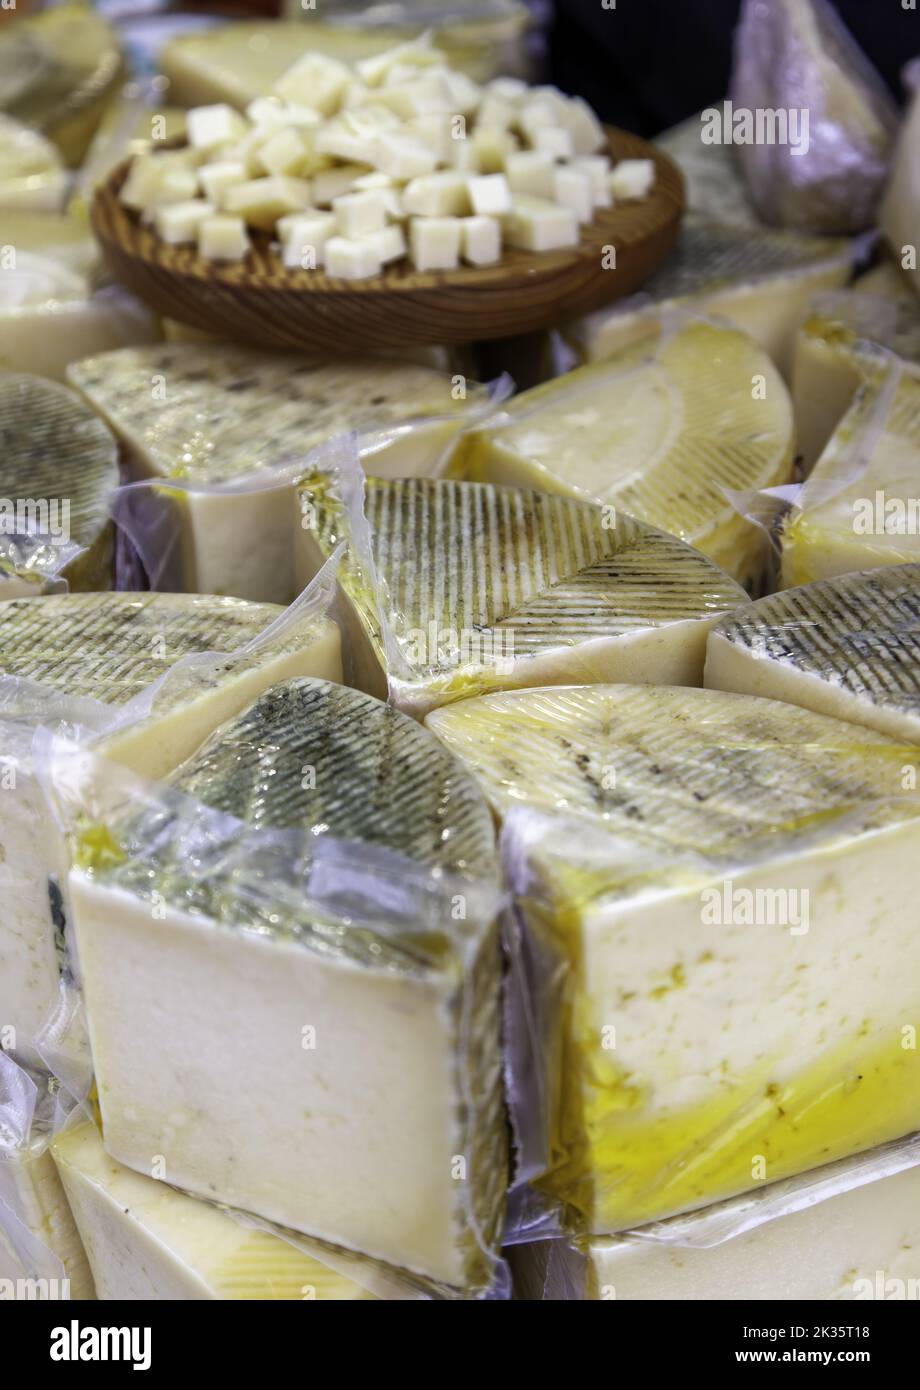 Detail of artisanal dairy product in an old market in Europe Stock Photo